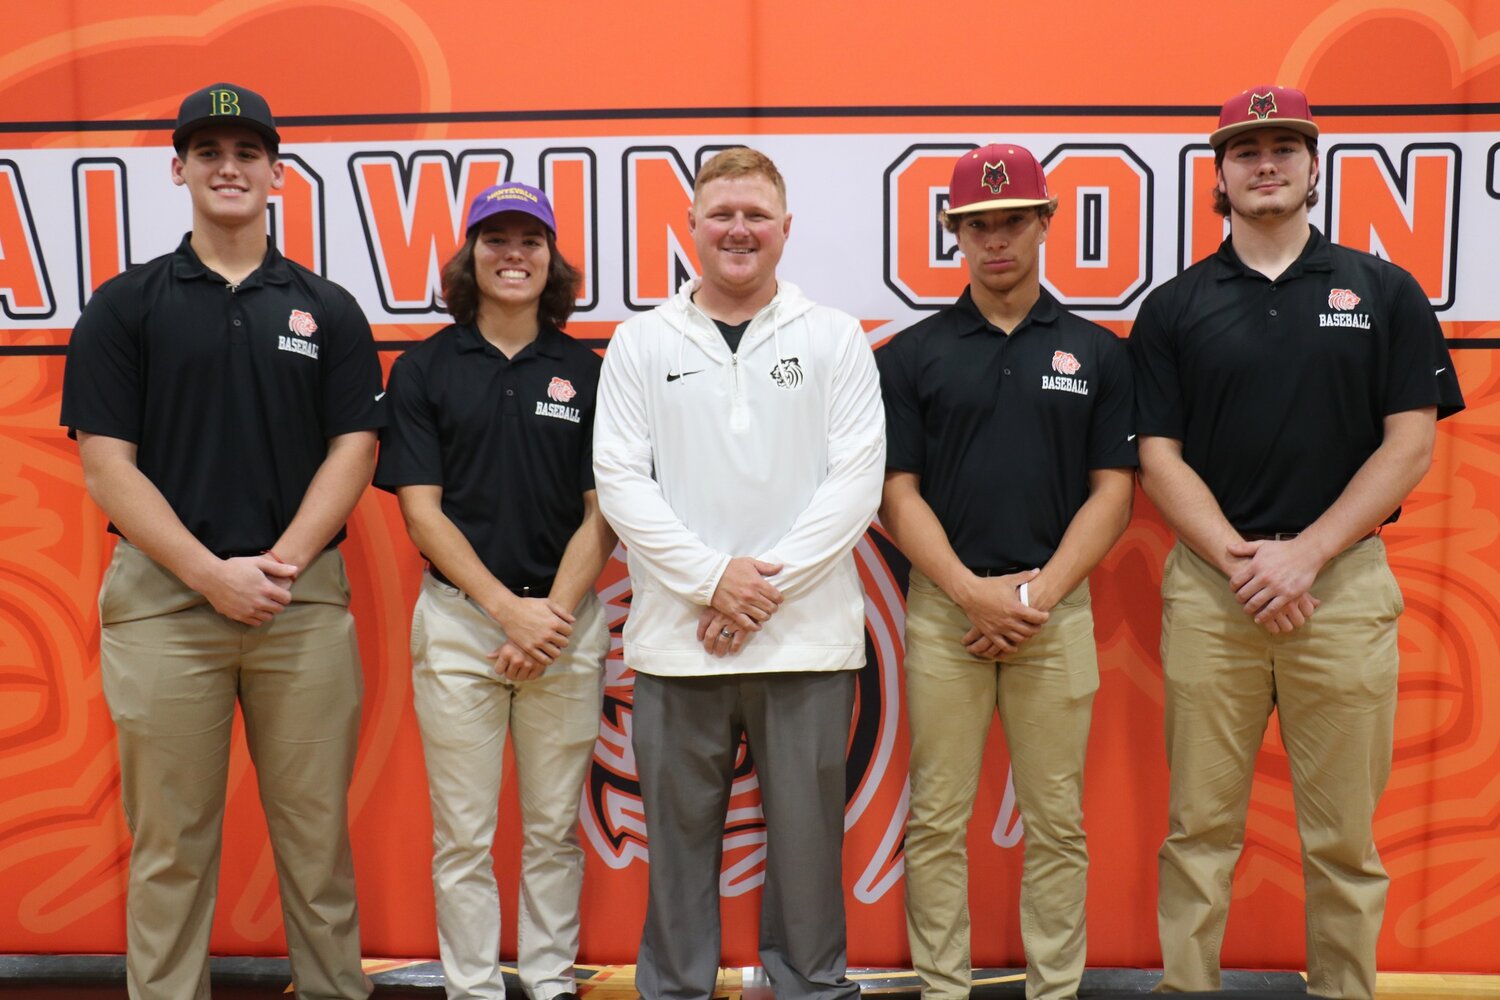 Tiger head baseball coach Trenton Higginbothem joined Wednesday’s honorees in celebrating their college signings. Jaxon Schuler is headed to Bishop State, Landon Walker signed with Montevallo and Quincy Walters and Eli Woody inked commitments to Coastal Alabama.